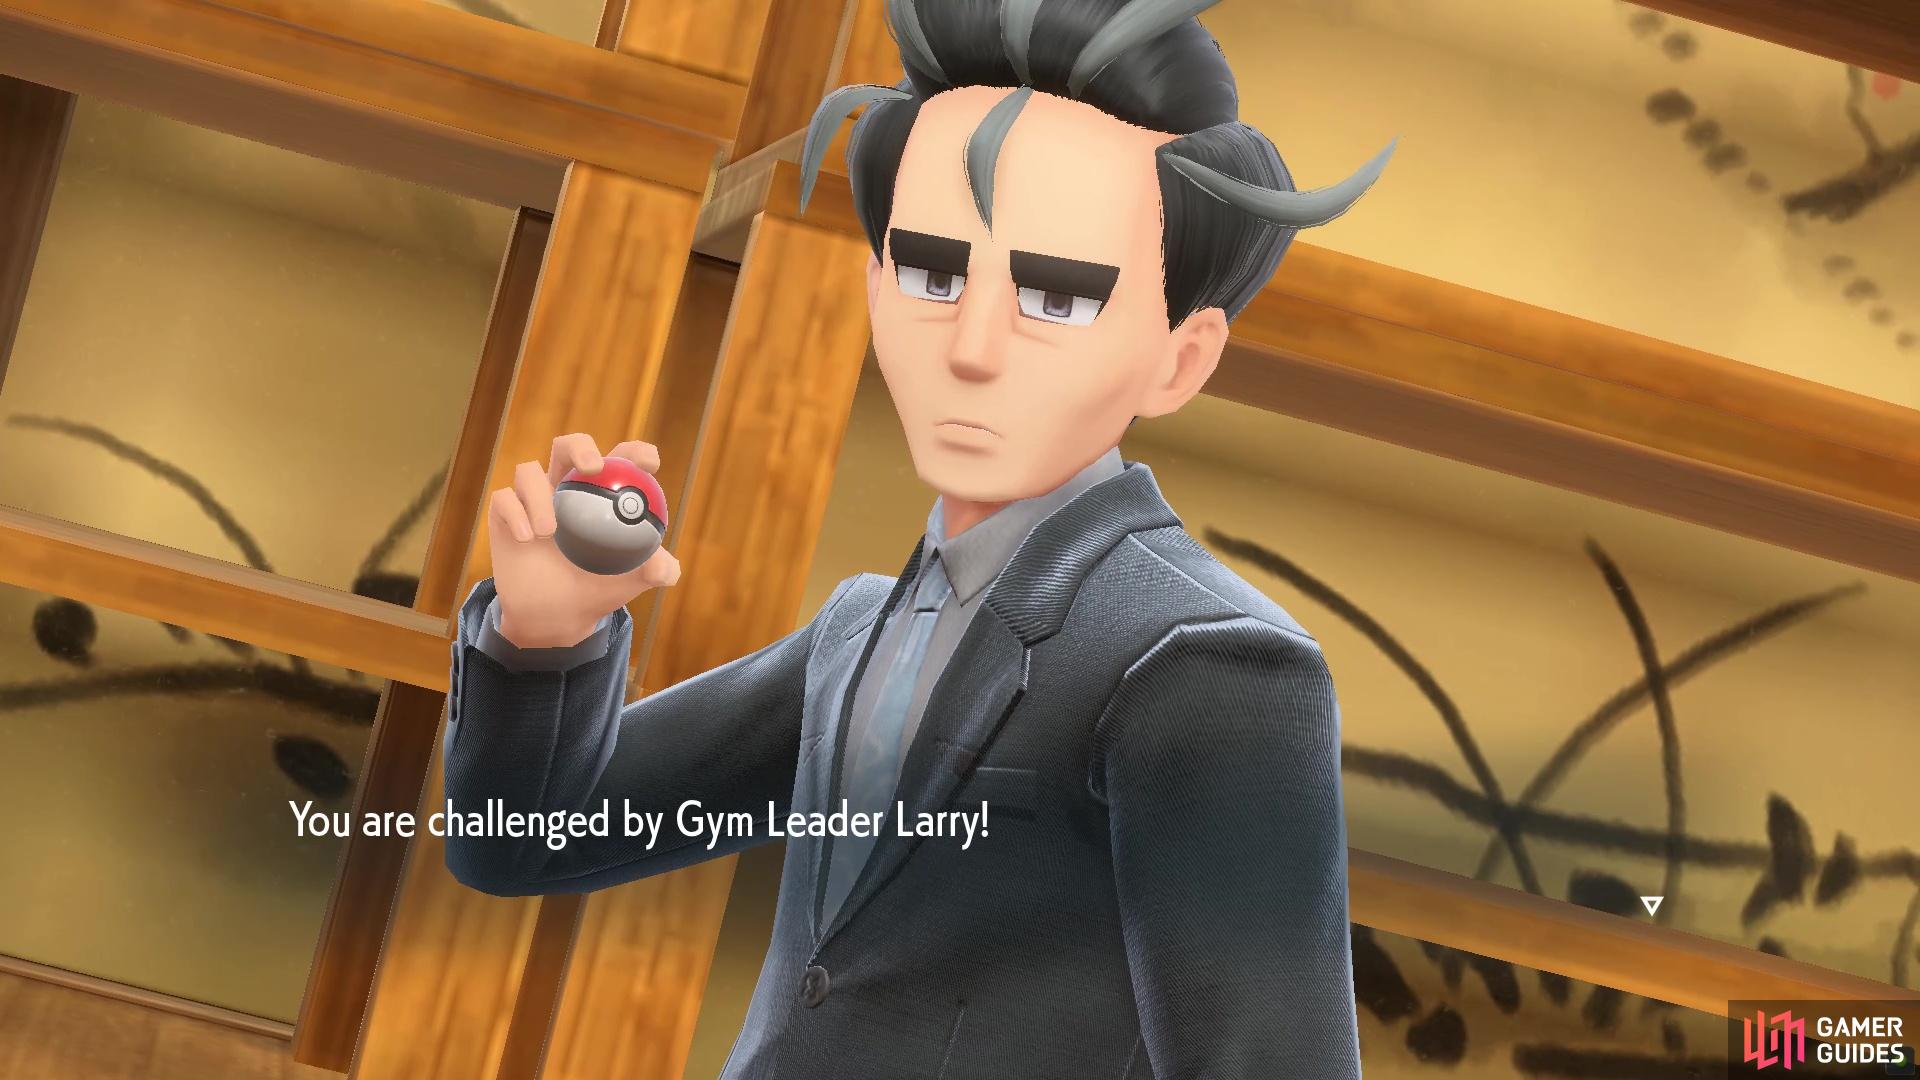 Time to face Normal Gym Leader Larry.